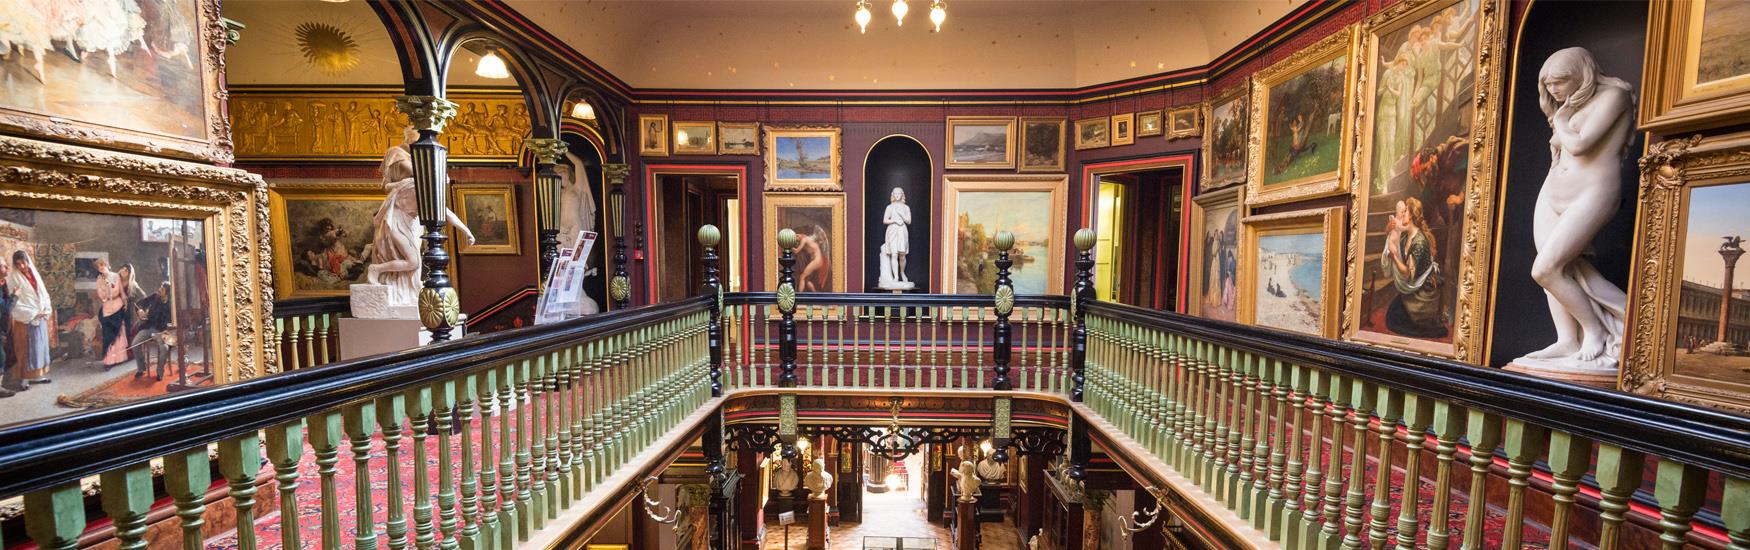 Visit the beautiful Russell-Cotes Art Gallery & Museum